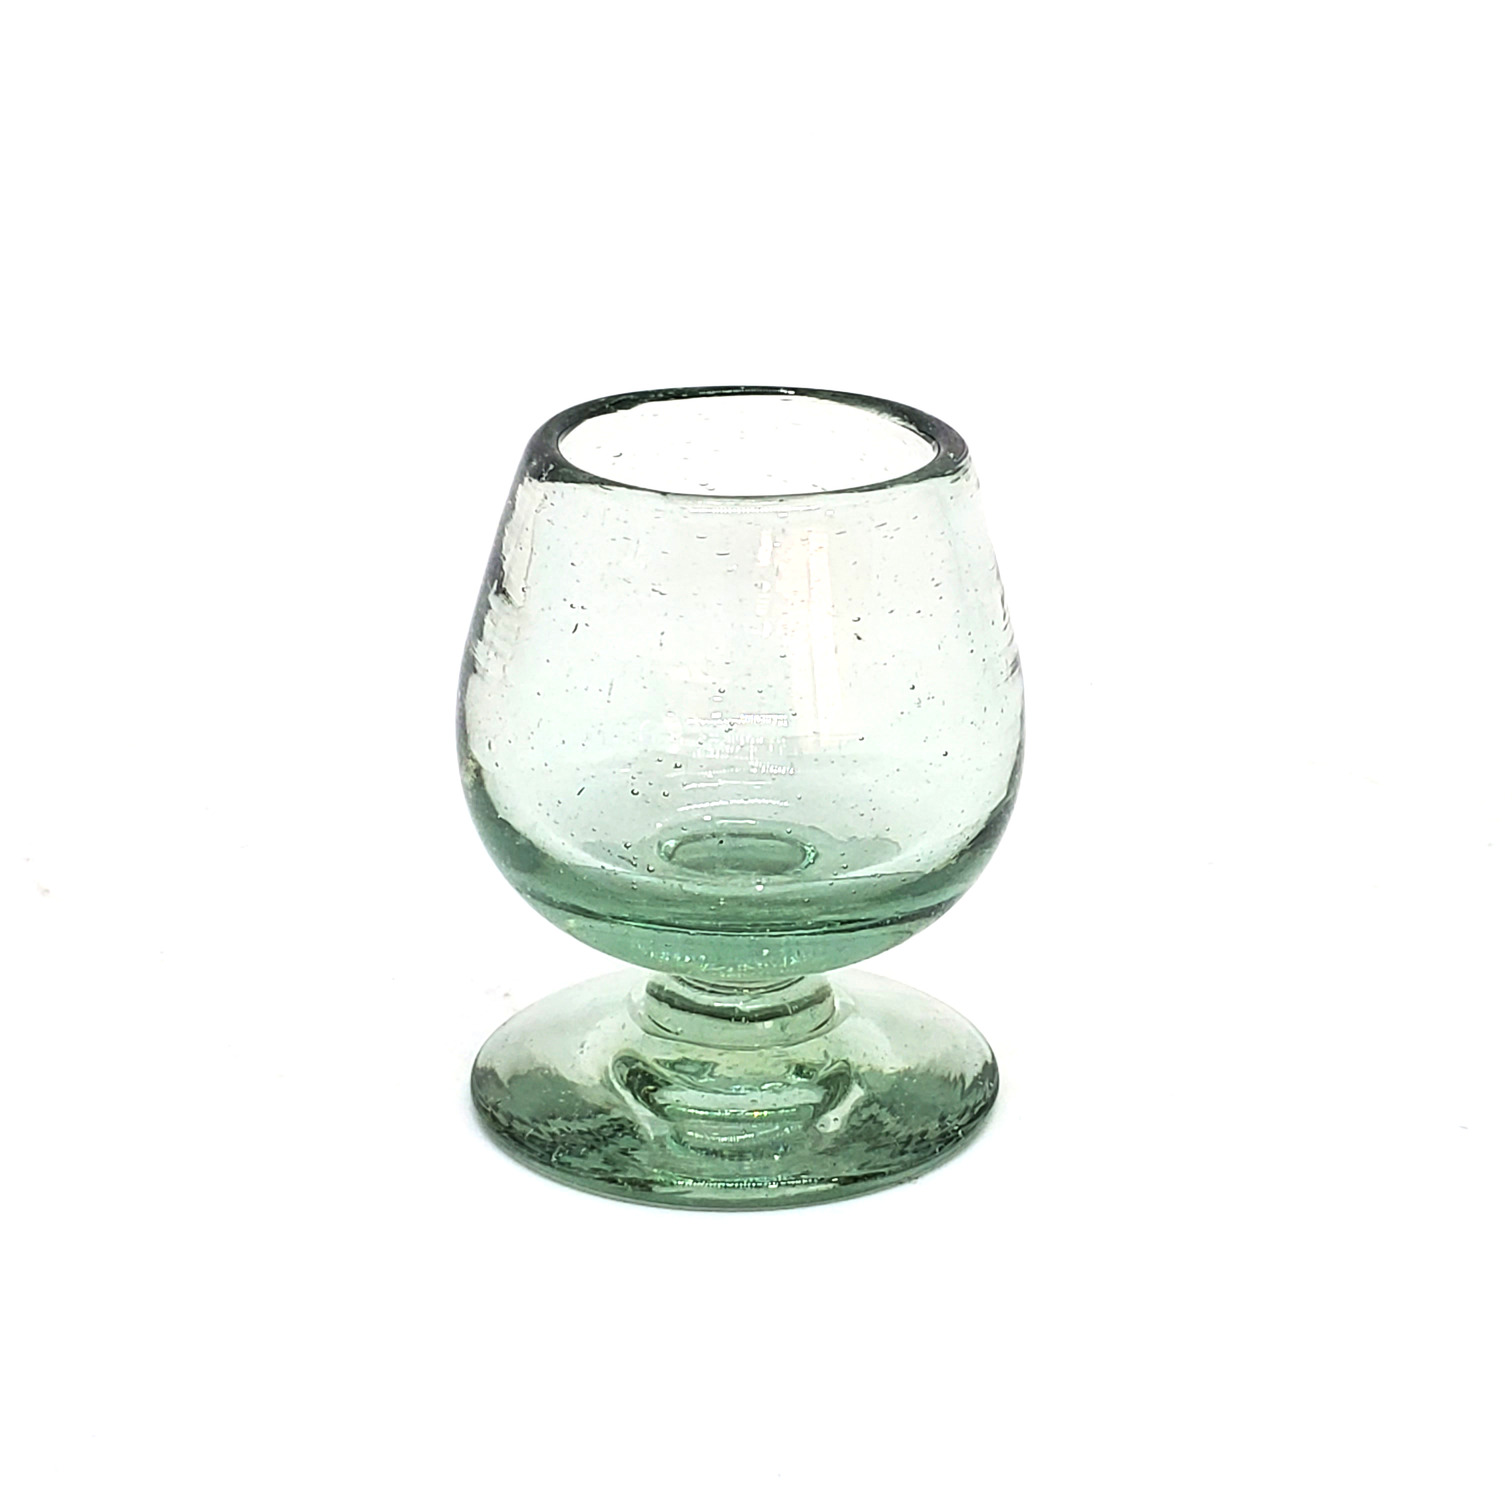 Wholesale Clear Glassware / Clear Tequila Sippers  / Sip your favourite tequila or mezcal with these iconic clear handcrafted sipping glasses. You may also serve lemon juice or other chasers.